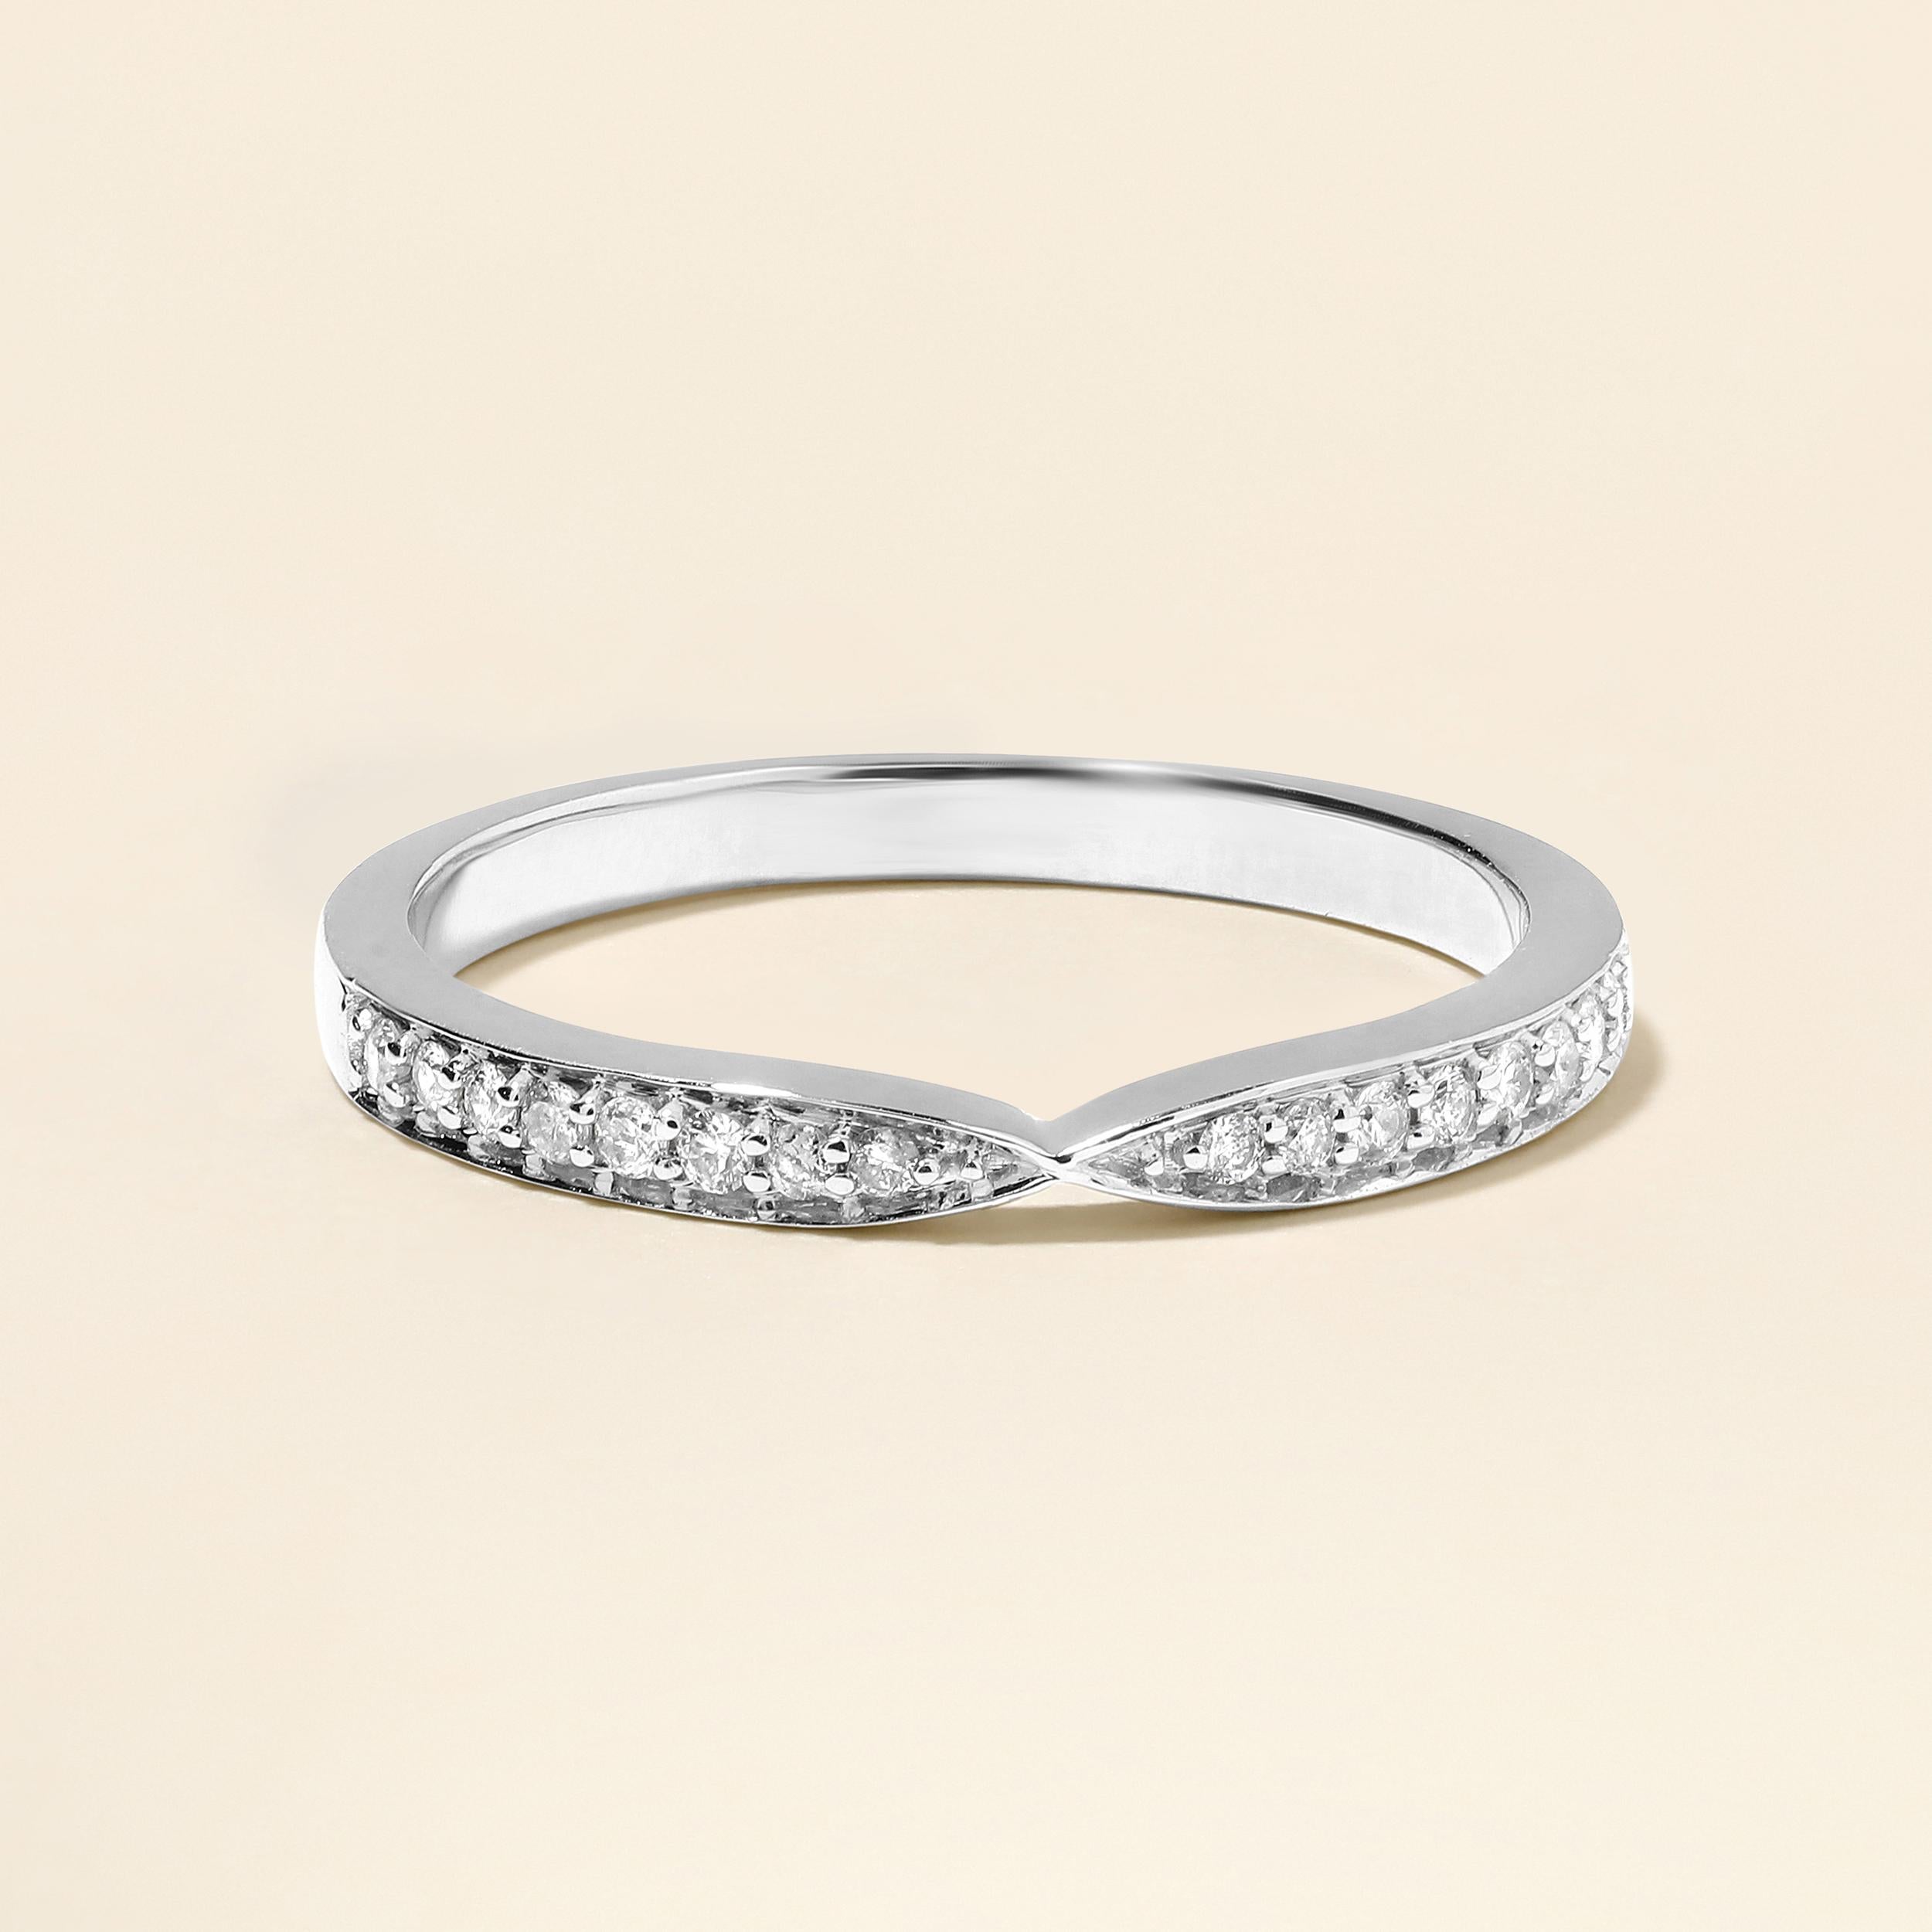 Ring Size: US 7

Crafted in 2.11 grams of 14K White Gold, the ring contains 16 stones of Round Natural Diamonds with a total of 0.14 carat in G-H color and I1-I2 clarity.

CONTEMPORARY AND TIMELESS ESSENCE: Crafted in 14-karat/18-karat with 100%